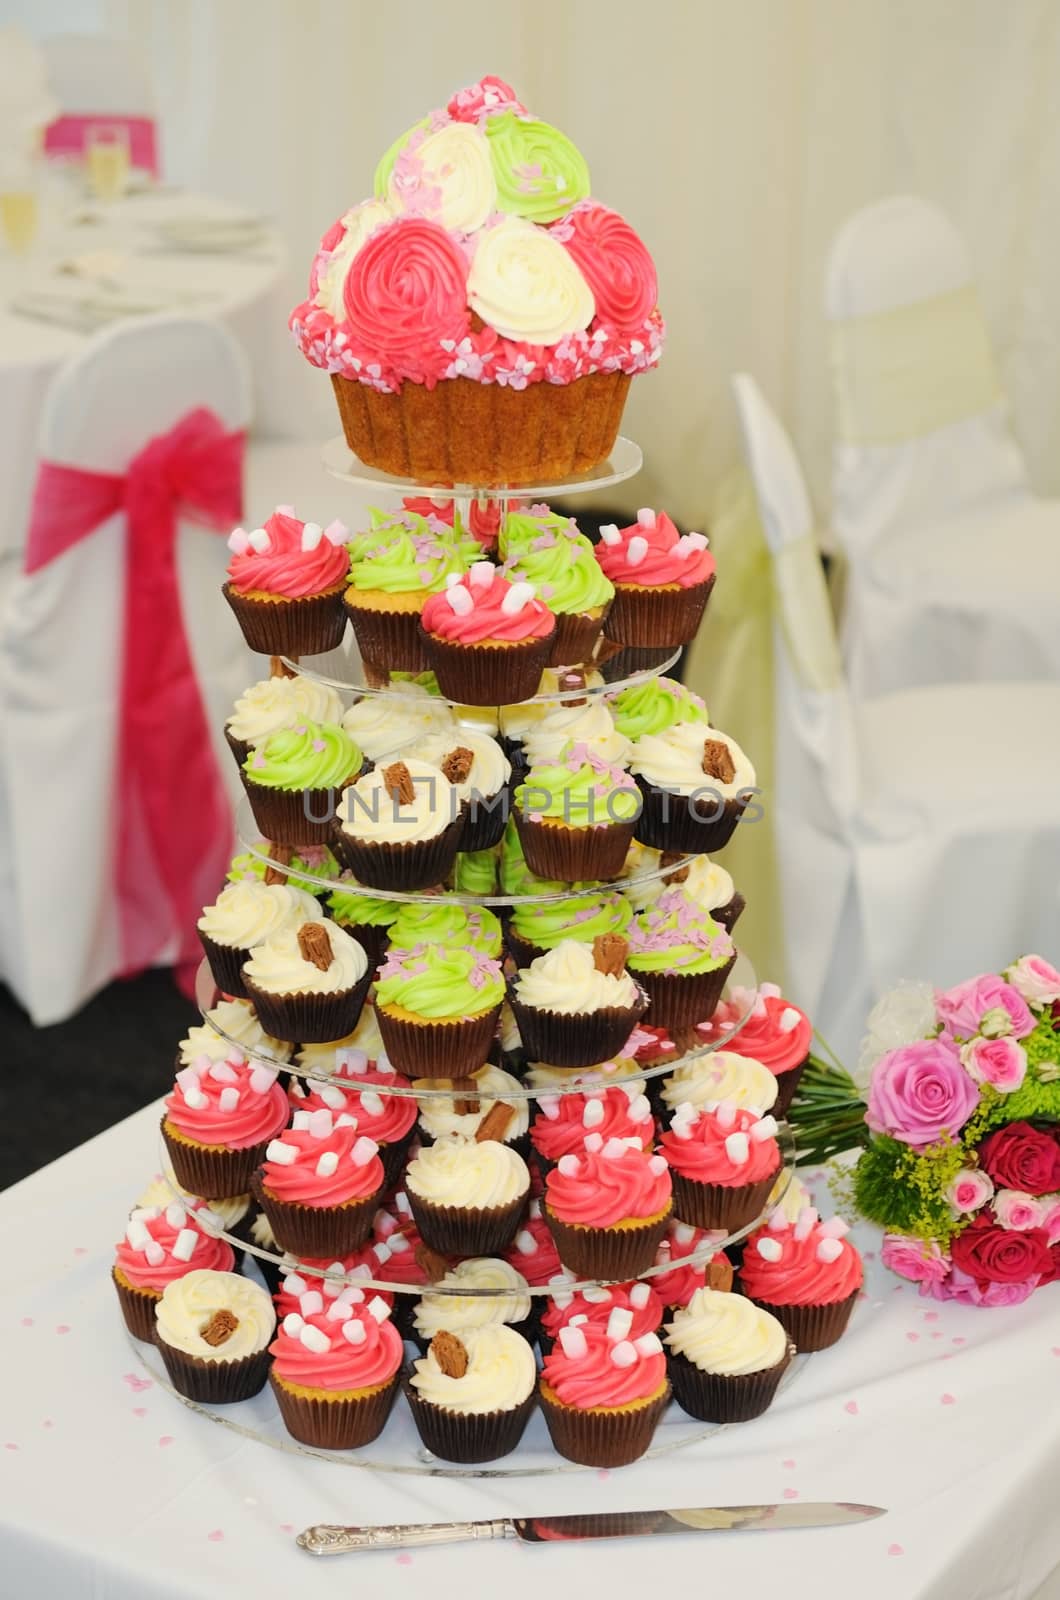 Cup cakes look colorful at wedding reception